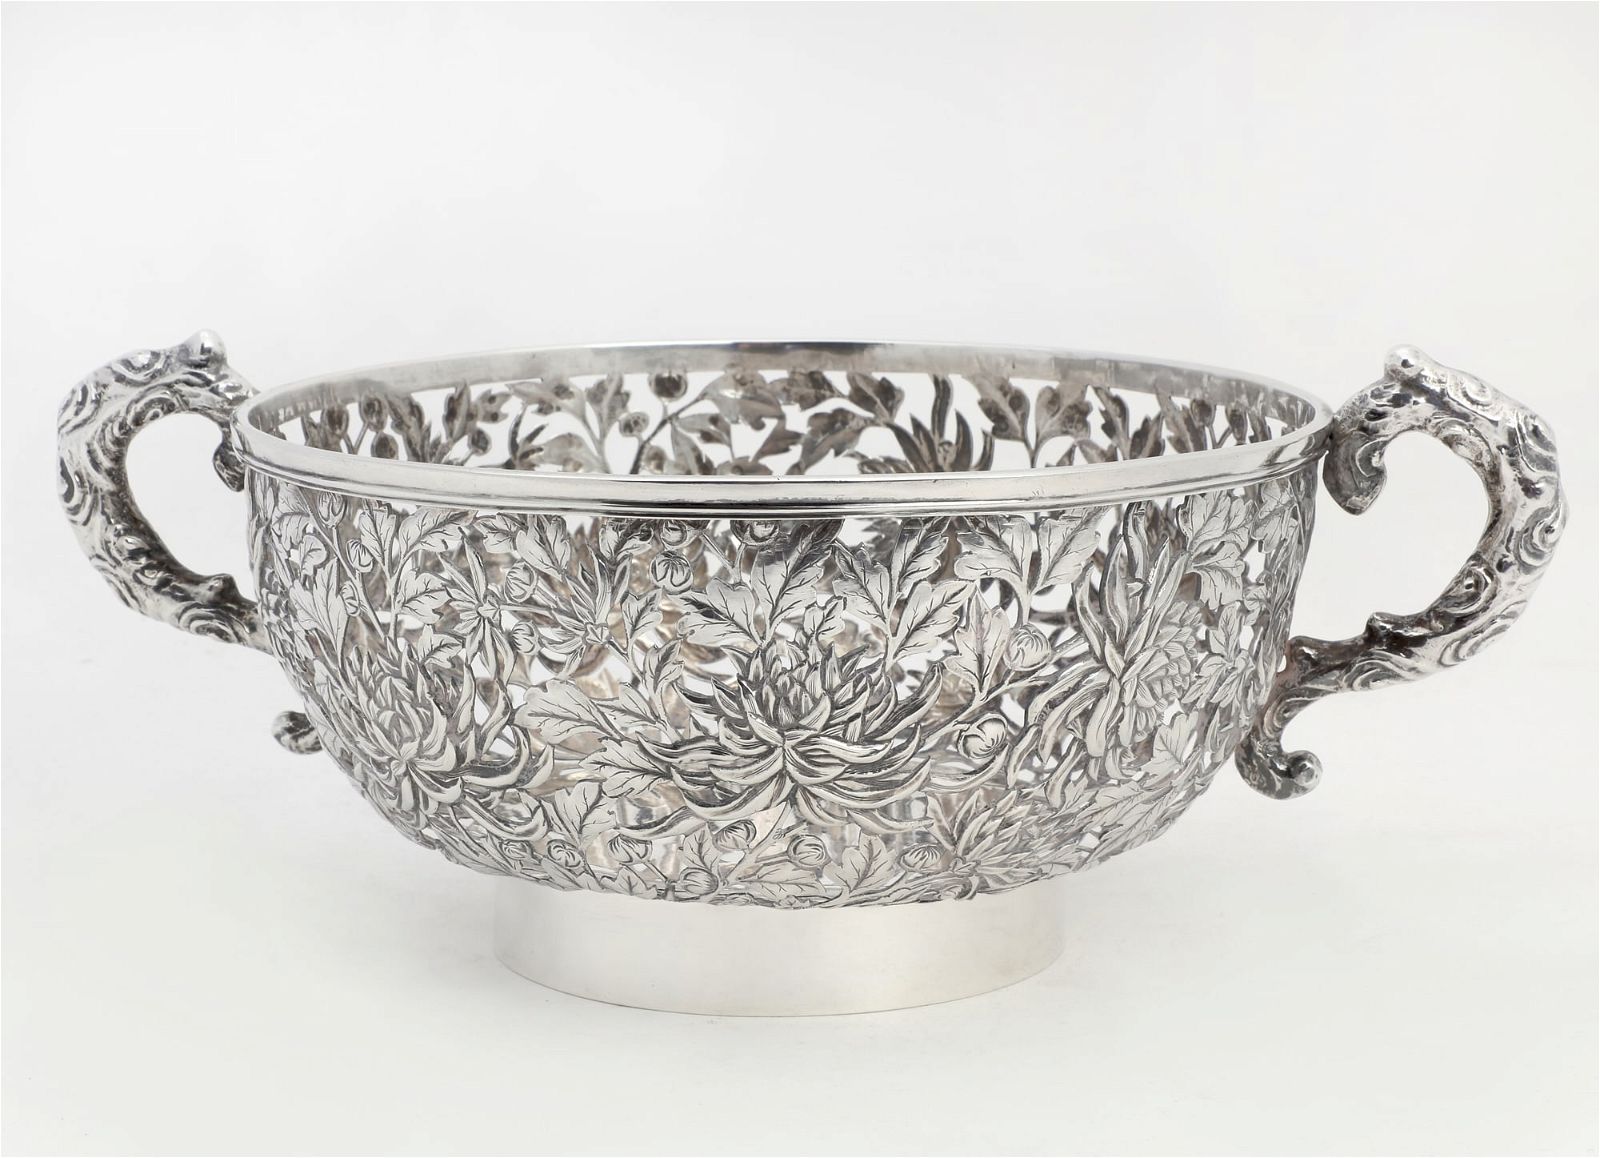 CHINESE EXPORT SILVER RETICULATED 2fb34d3